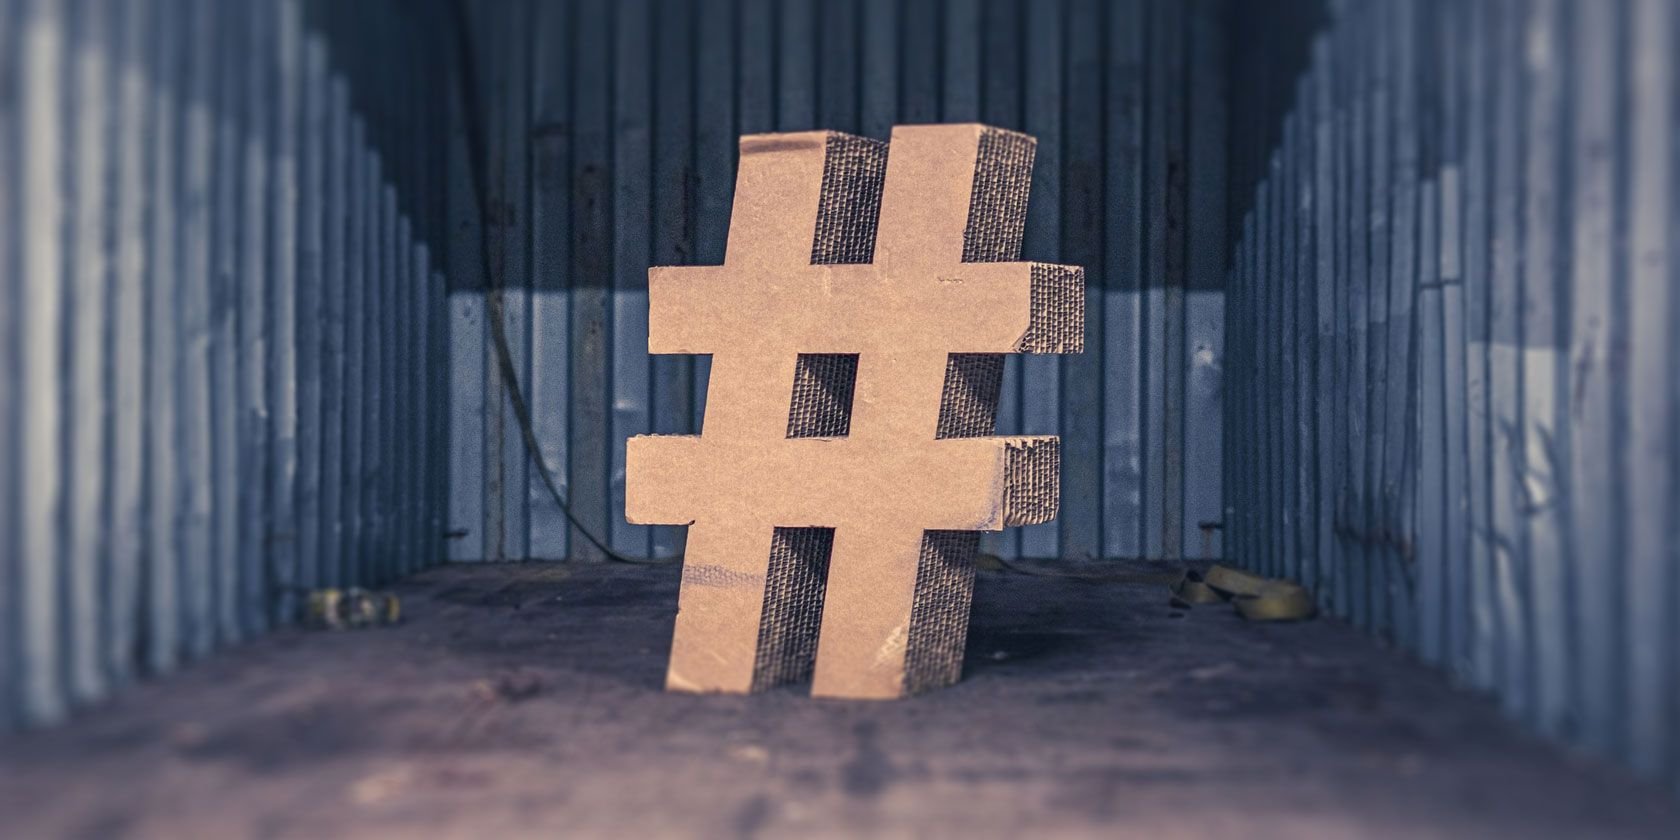 What Is a Hashtag and How Do I Use One?